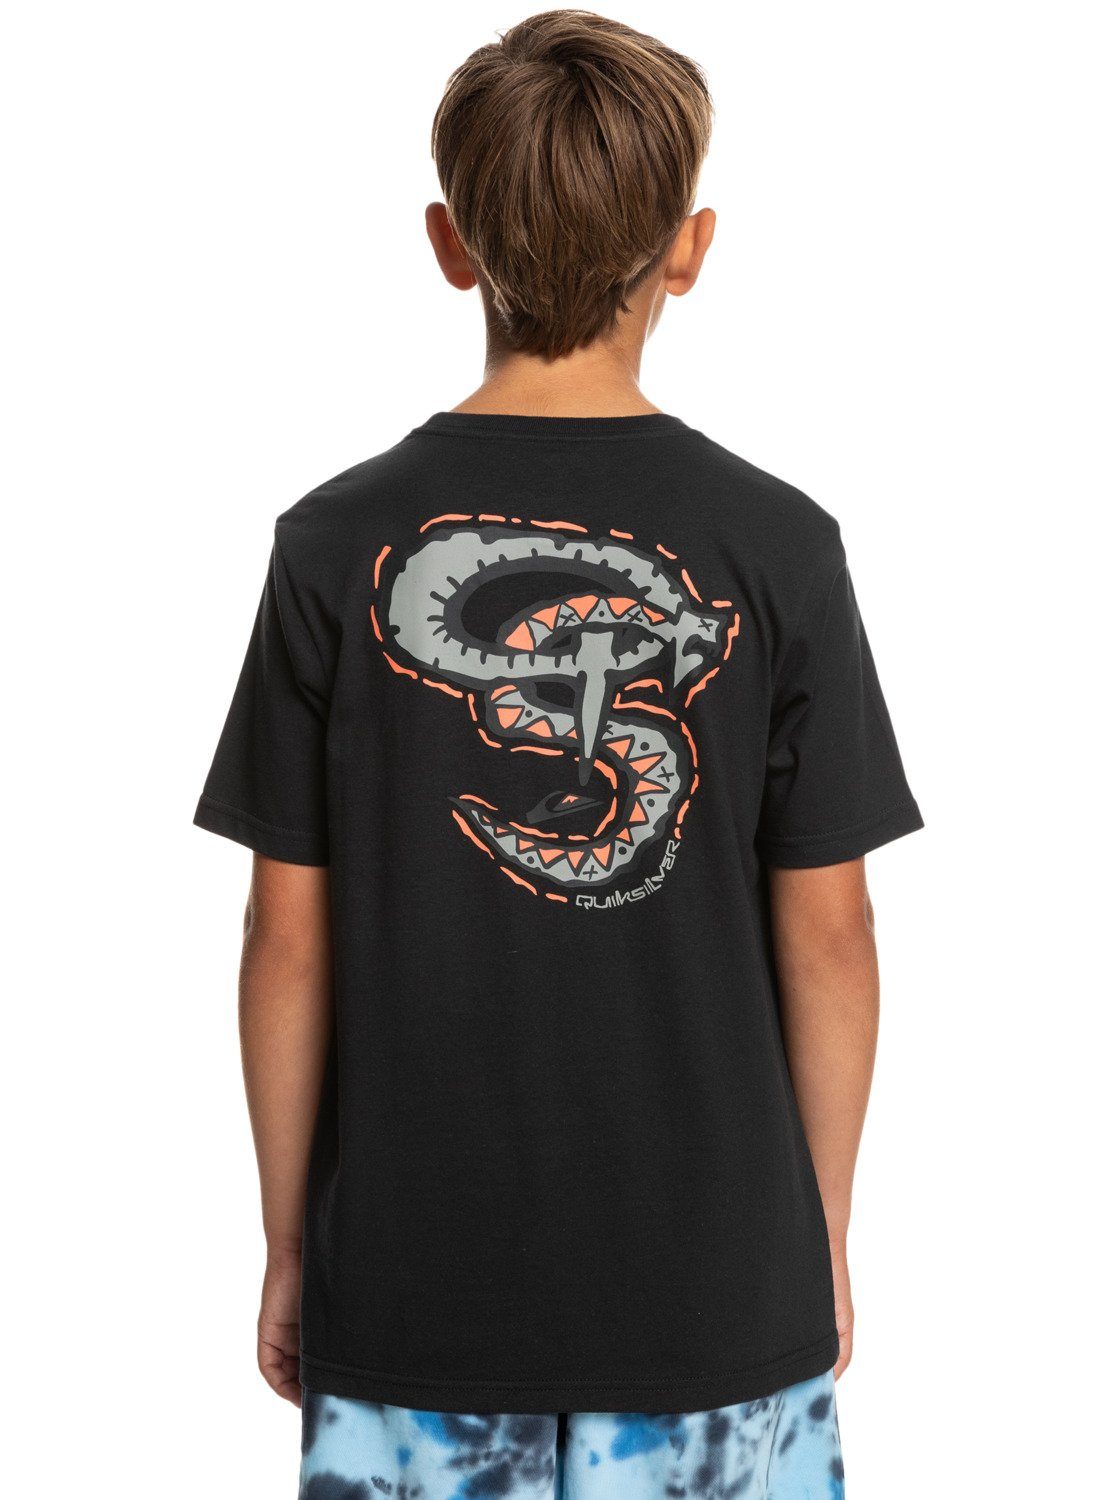 Snaky Words T-Shirt Quiksilver